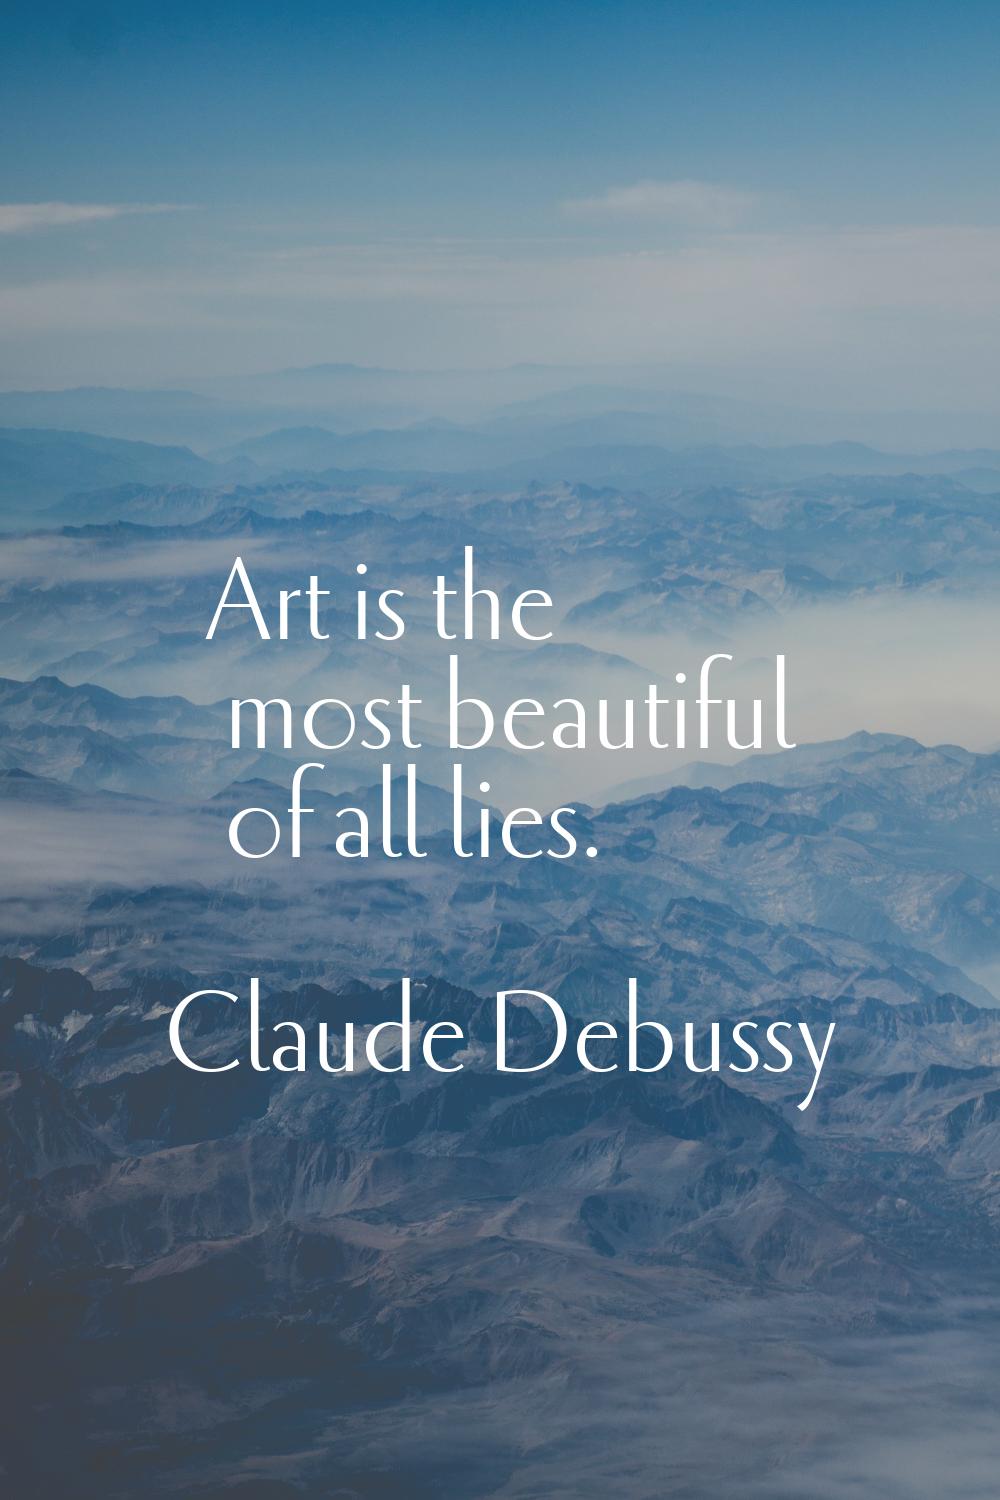 Art is the most beautiful of all lies.